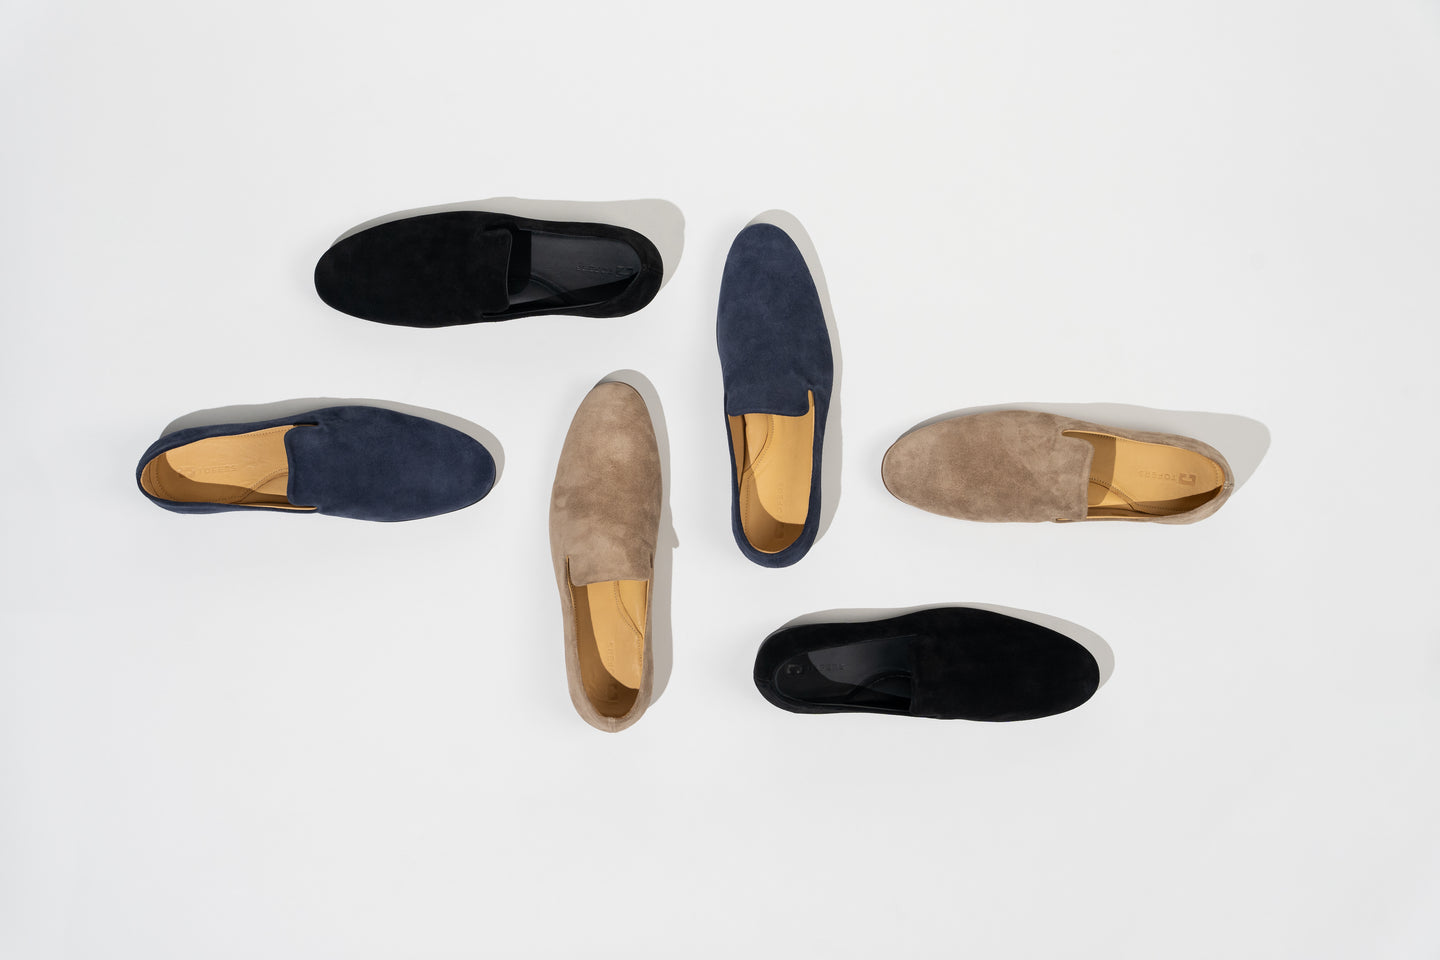 Buttery soft loafers for extreme comfort in subtly striking style